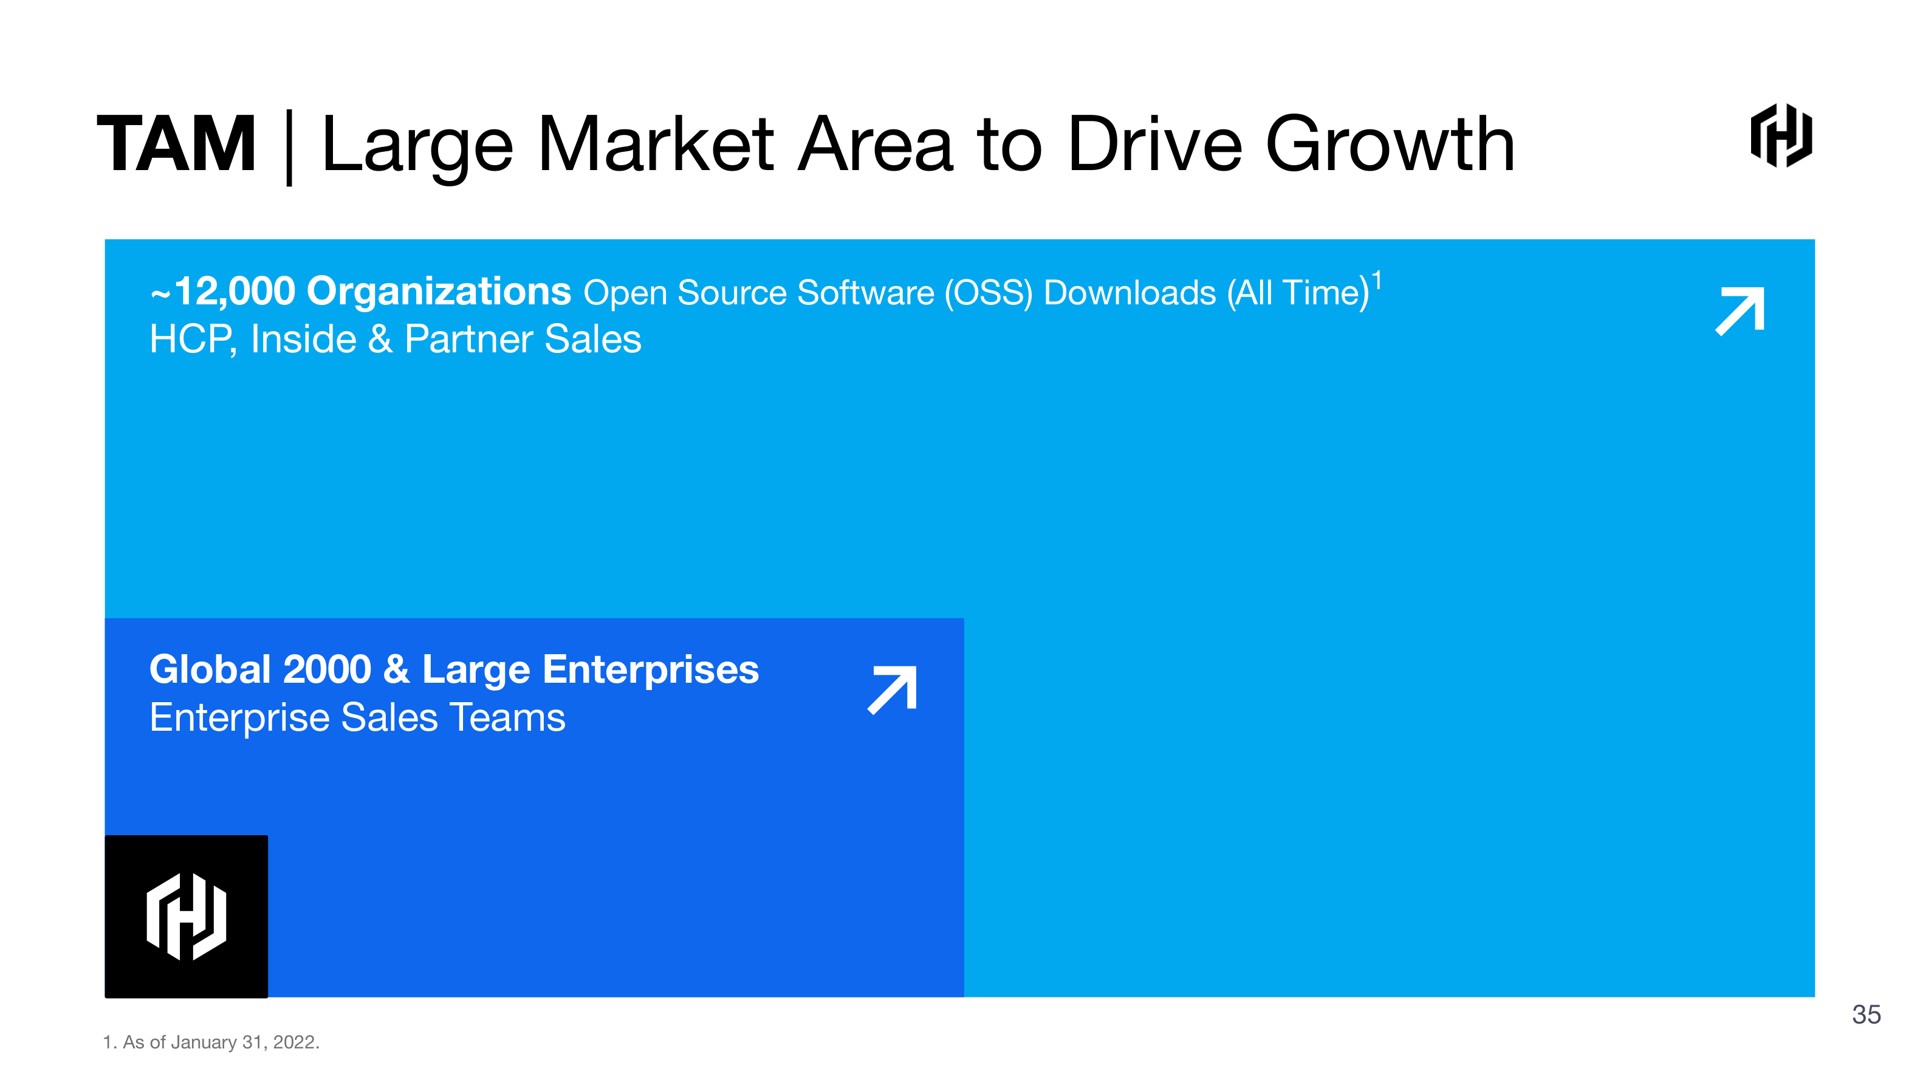 tam large market area to drive growth | HashiCorp